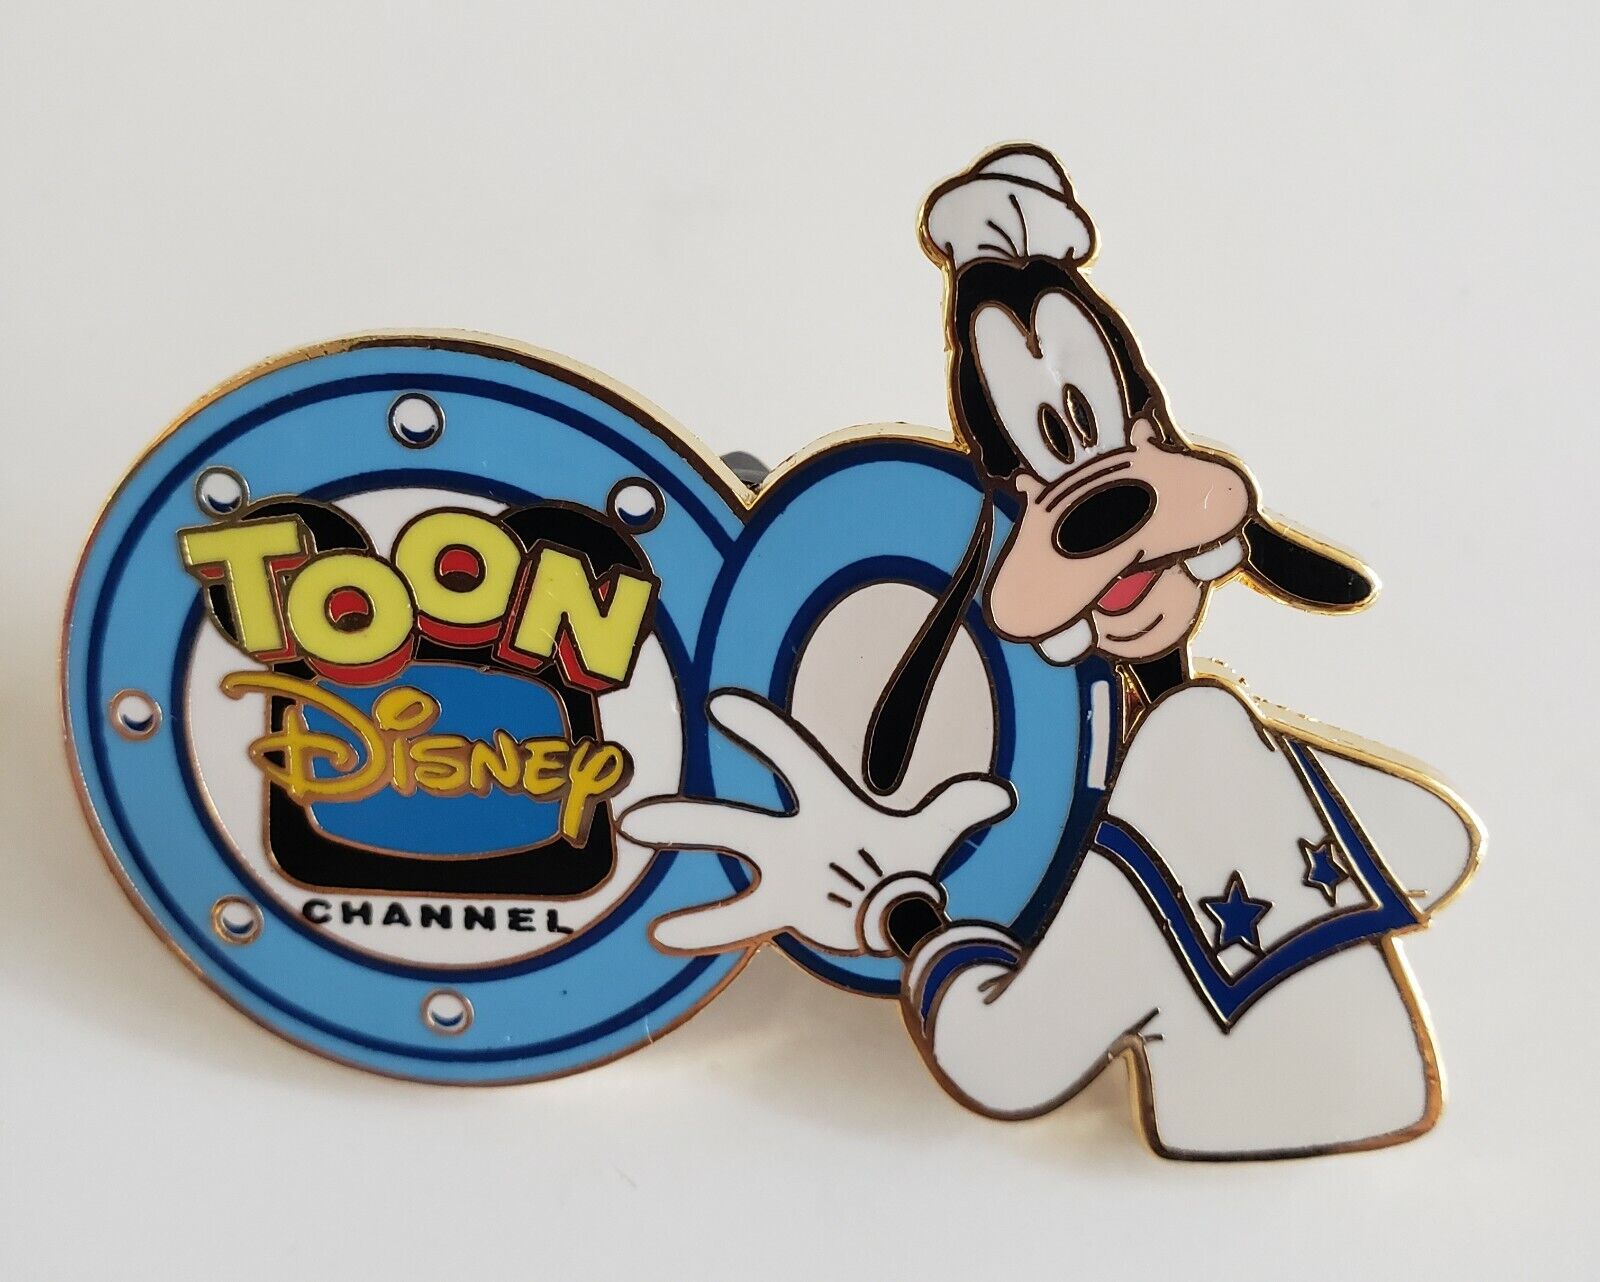 TOON DISNEY CHANNEL SAILOR GOOFY WITH PORTHOLE HTF PIN FREE SHIPPING! | eBay